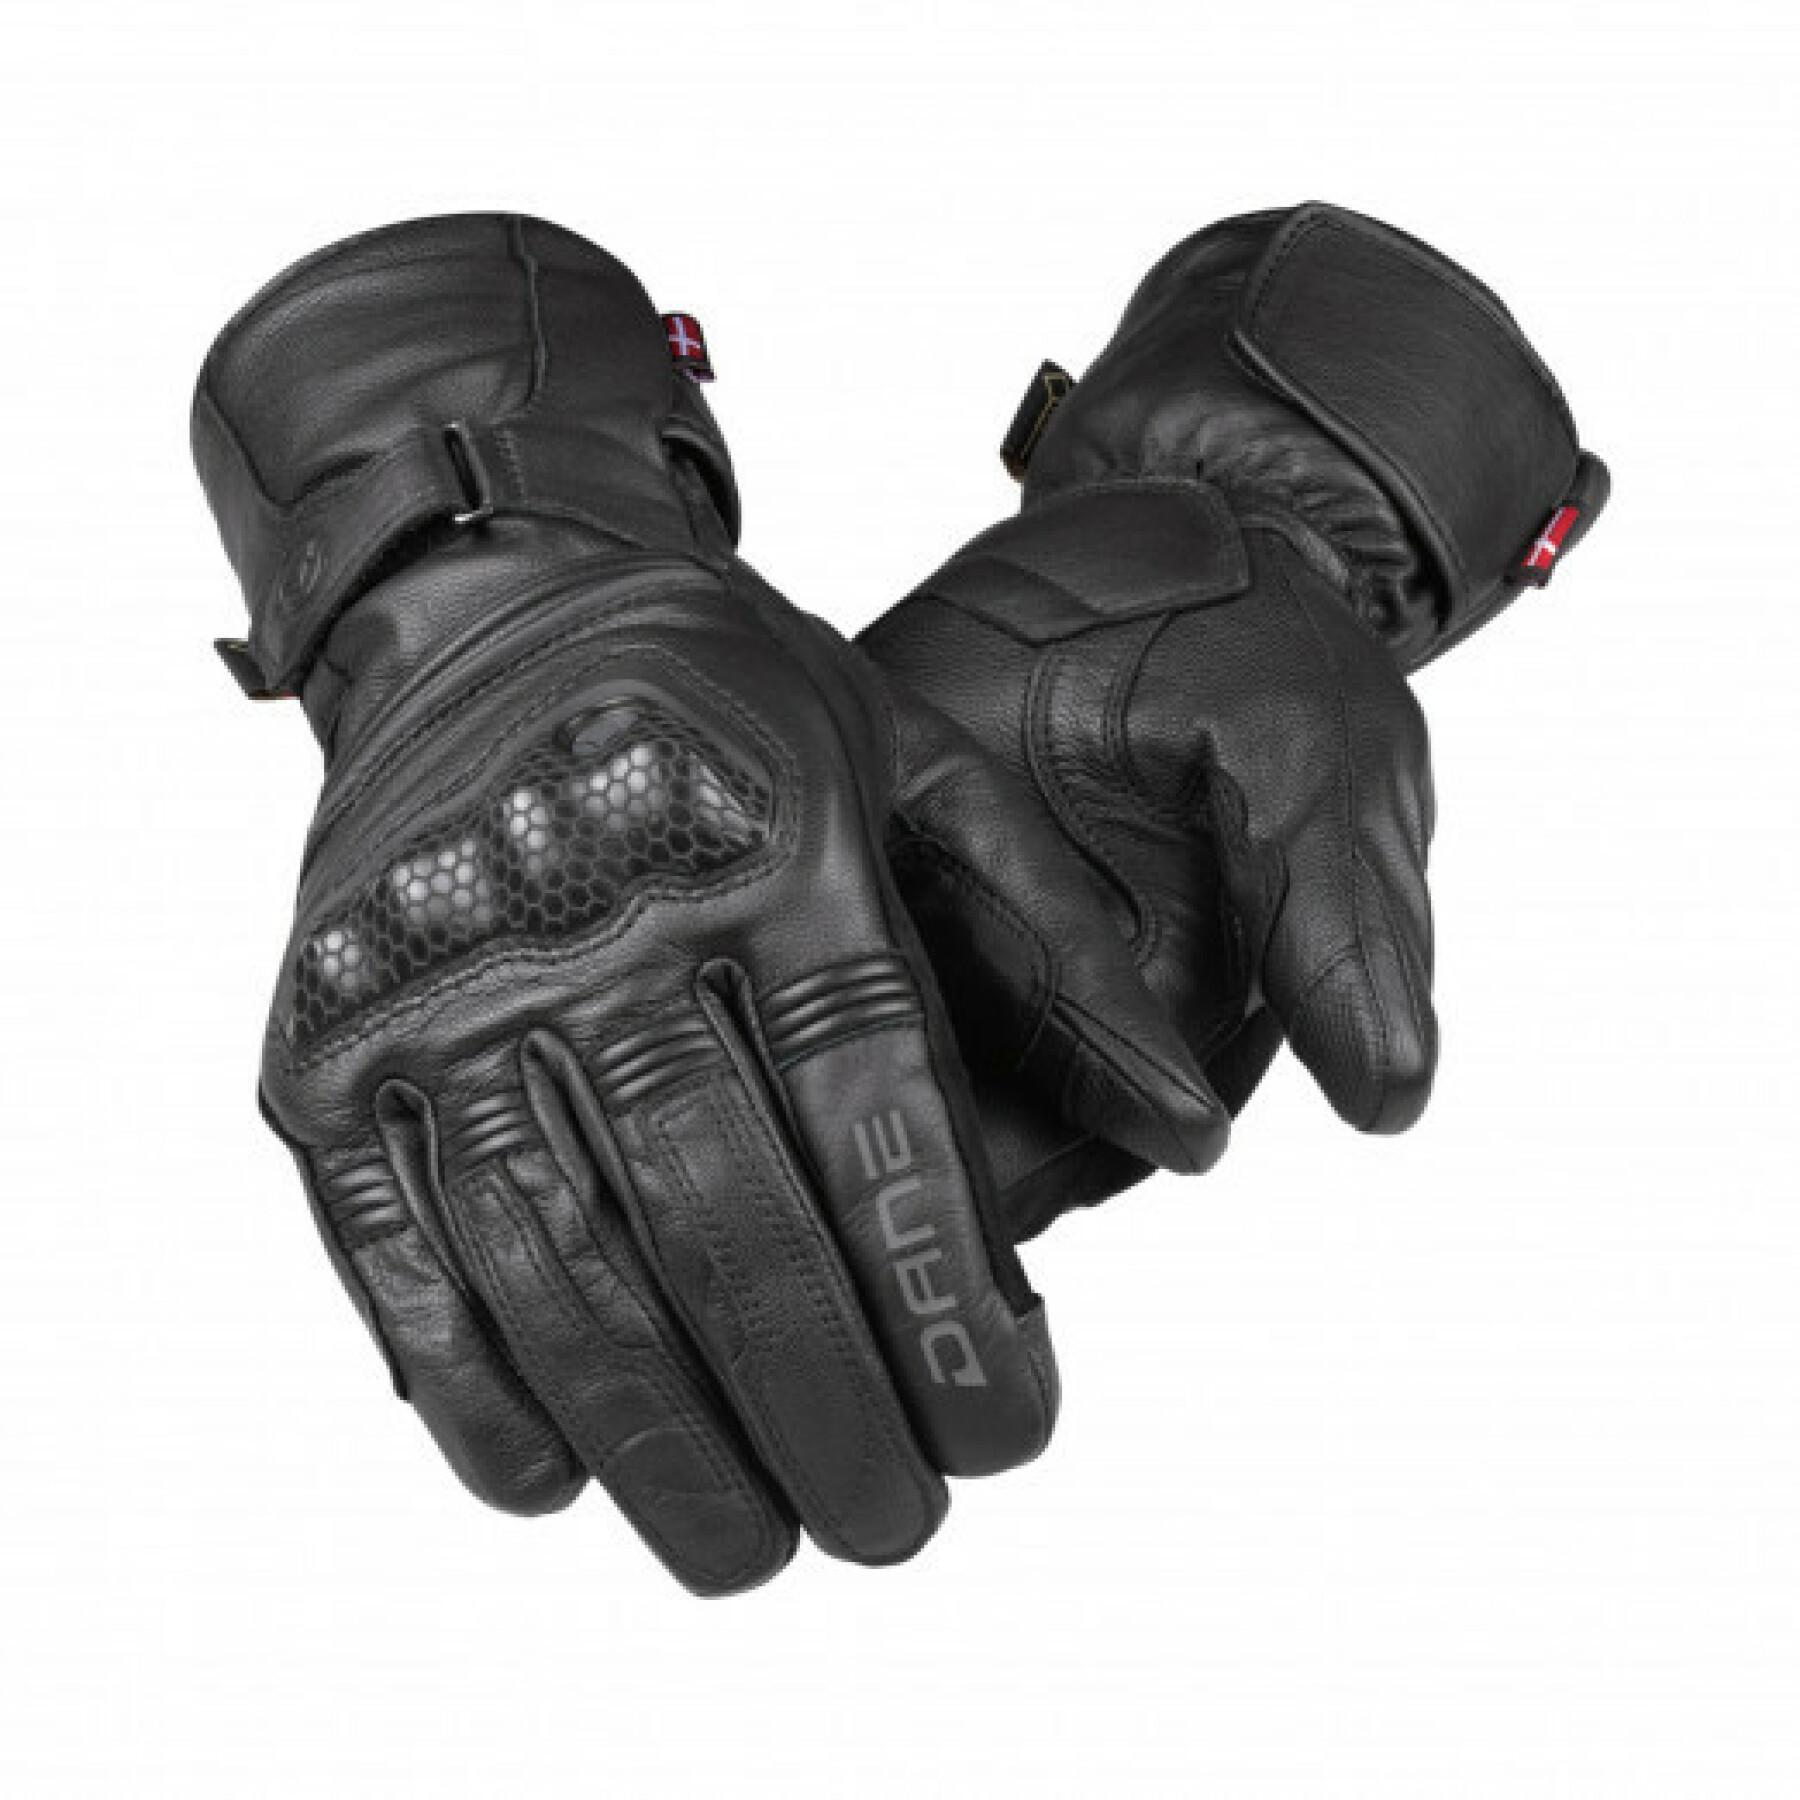 Heated motorcycle gloves Dane faaborg